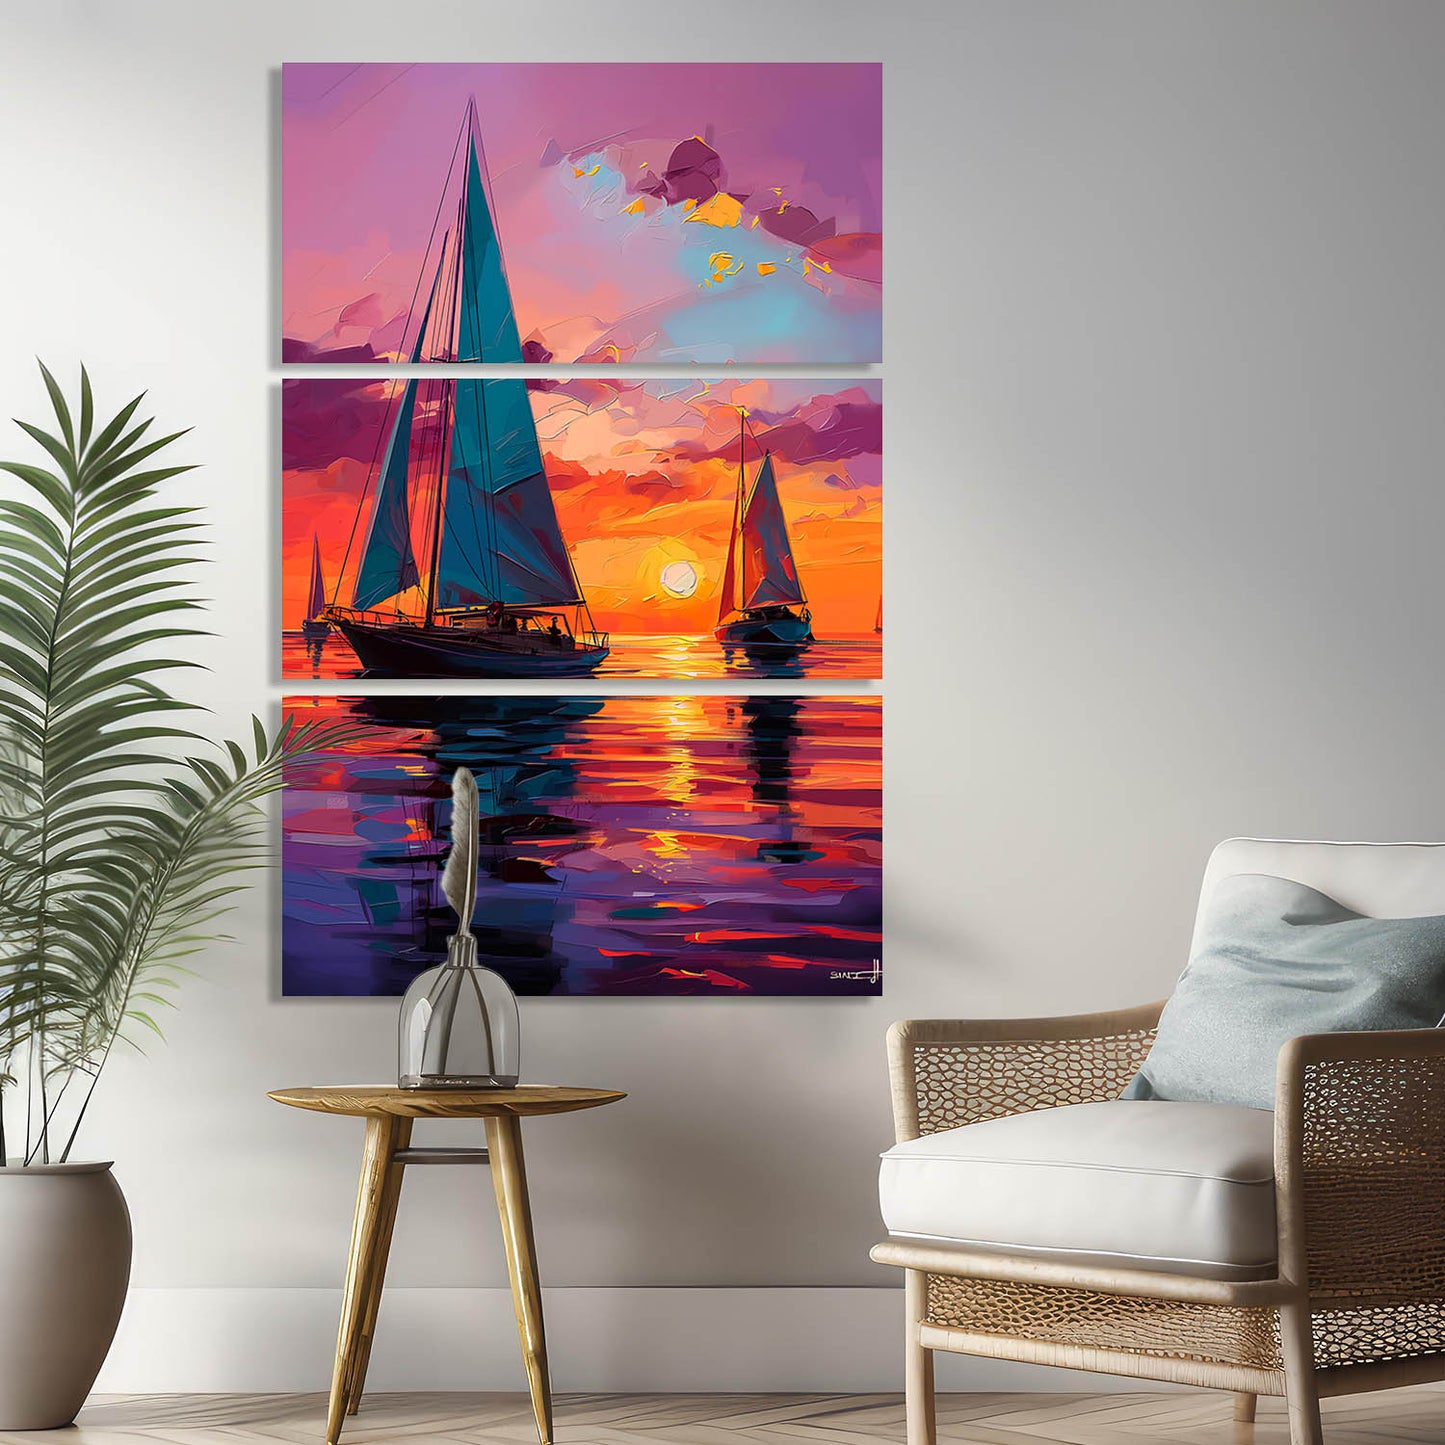 Modern Wall Art Canvas For Home Décor Office Living Room